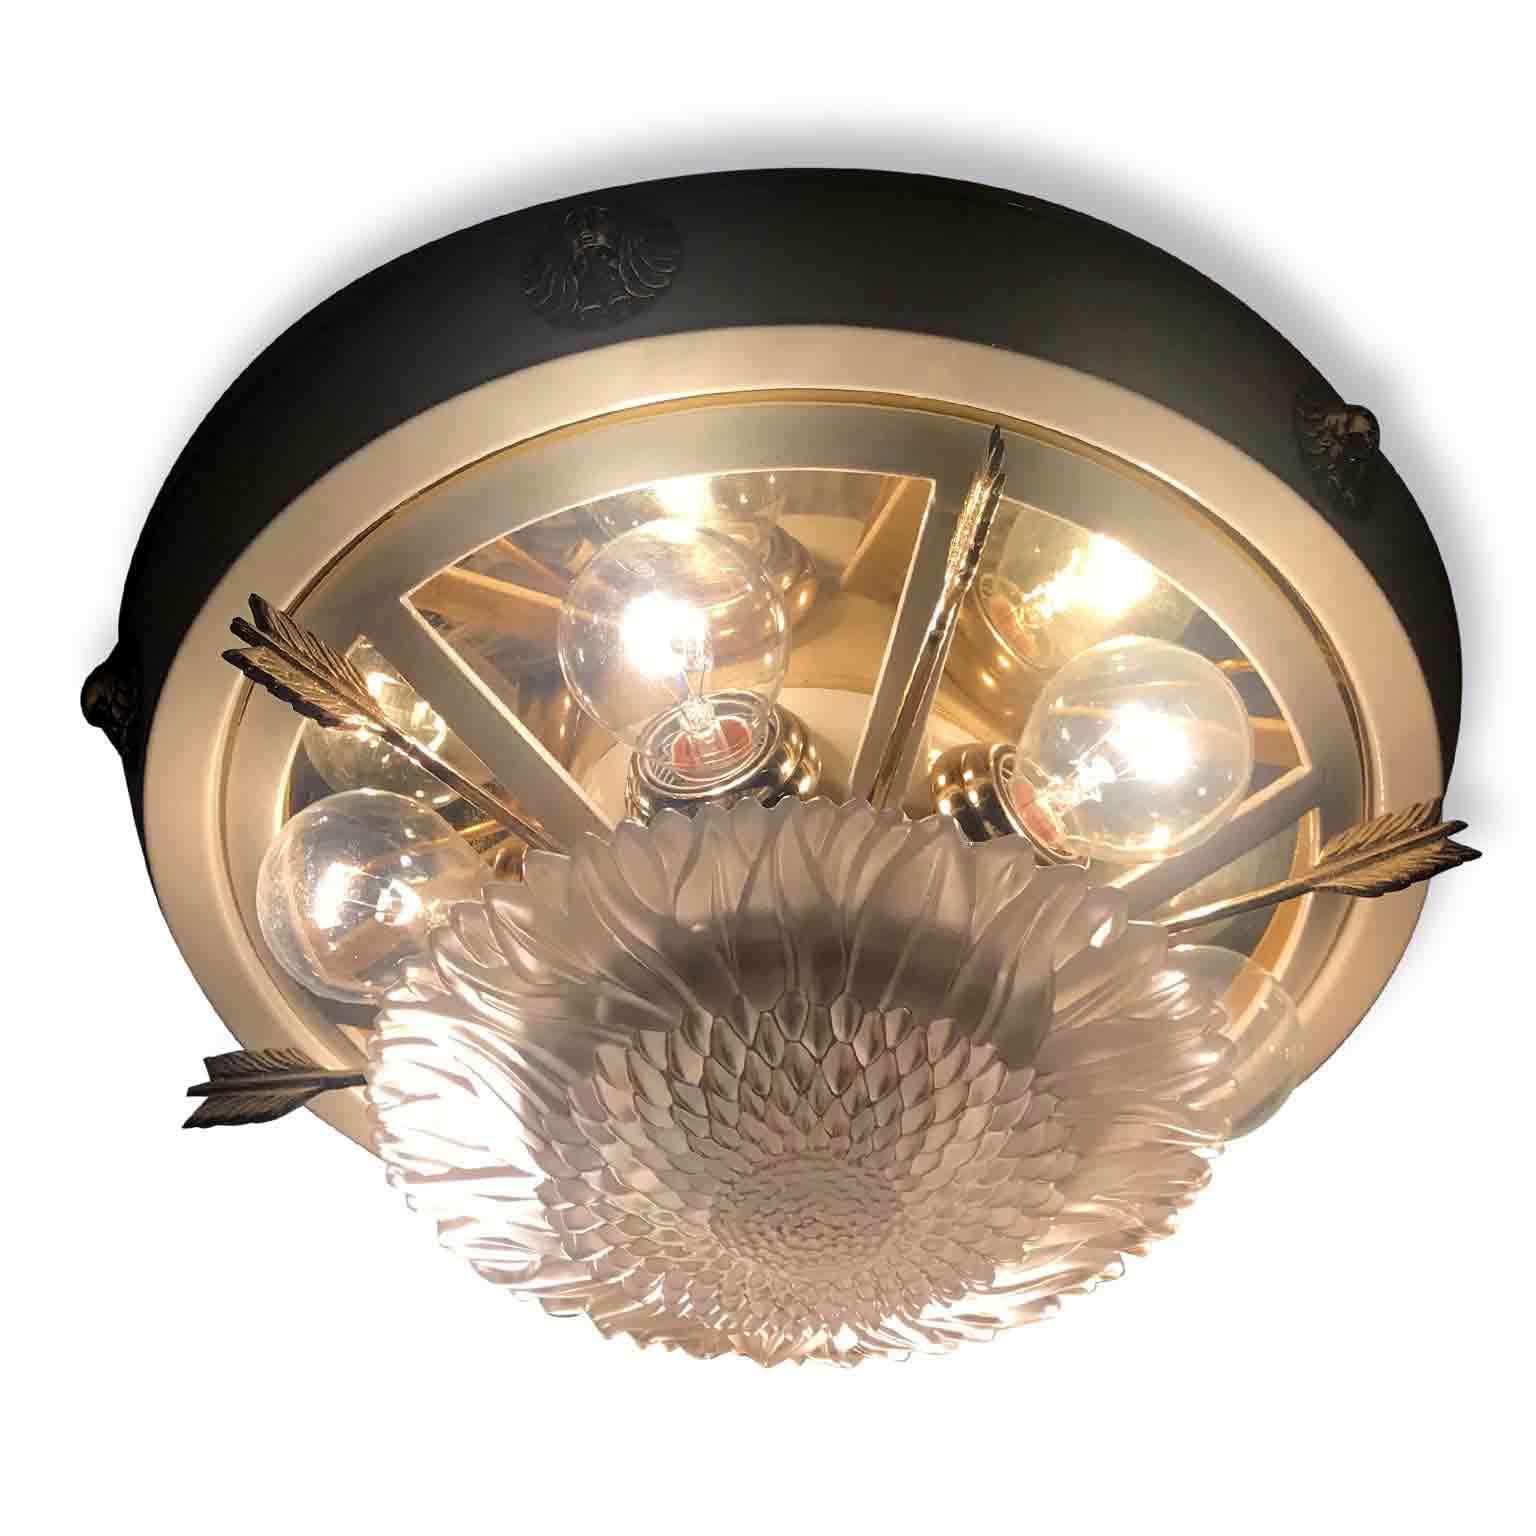 Frosted 20th Century Empire Style Ceiling Light Italian Banci Firenze White Flush Mount For Sale